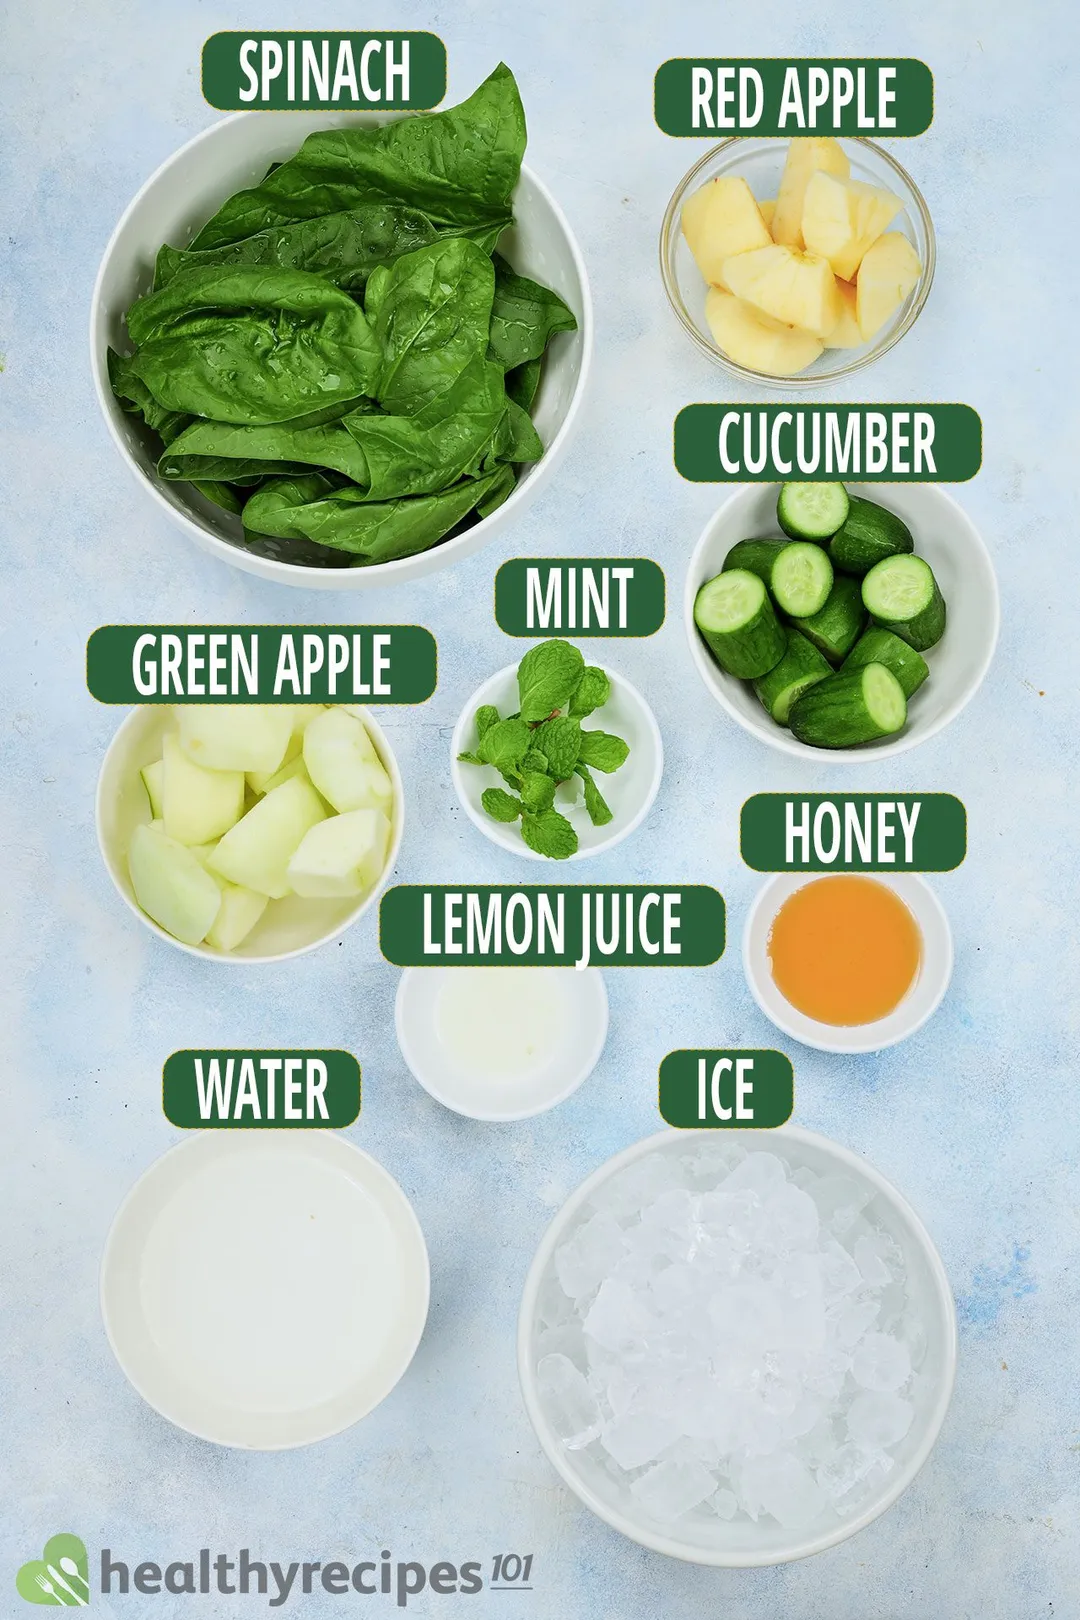 Ingredients for sour apple smoothie, including spinach, apple wedges, green apple wedges, sliced cucumbers, mint leaves, and other smoothie essentials.